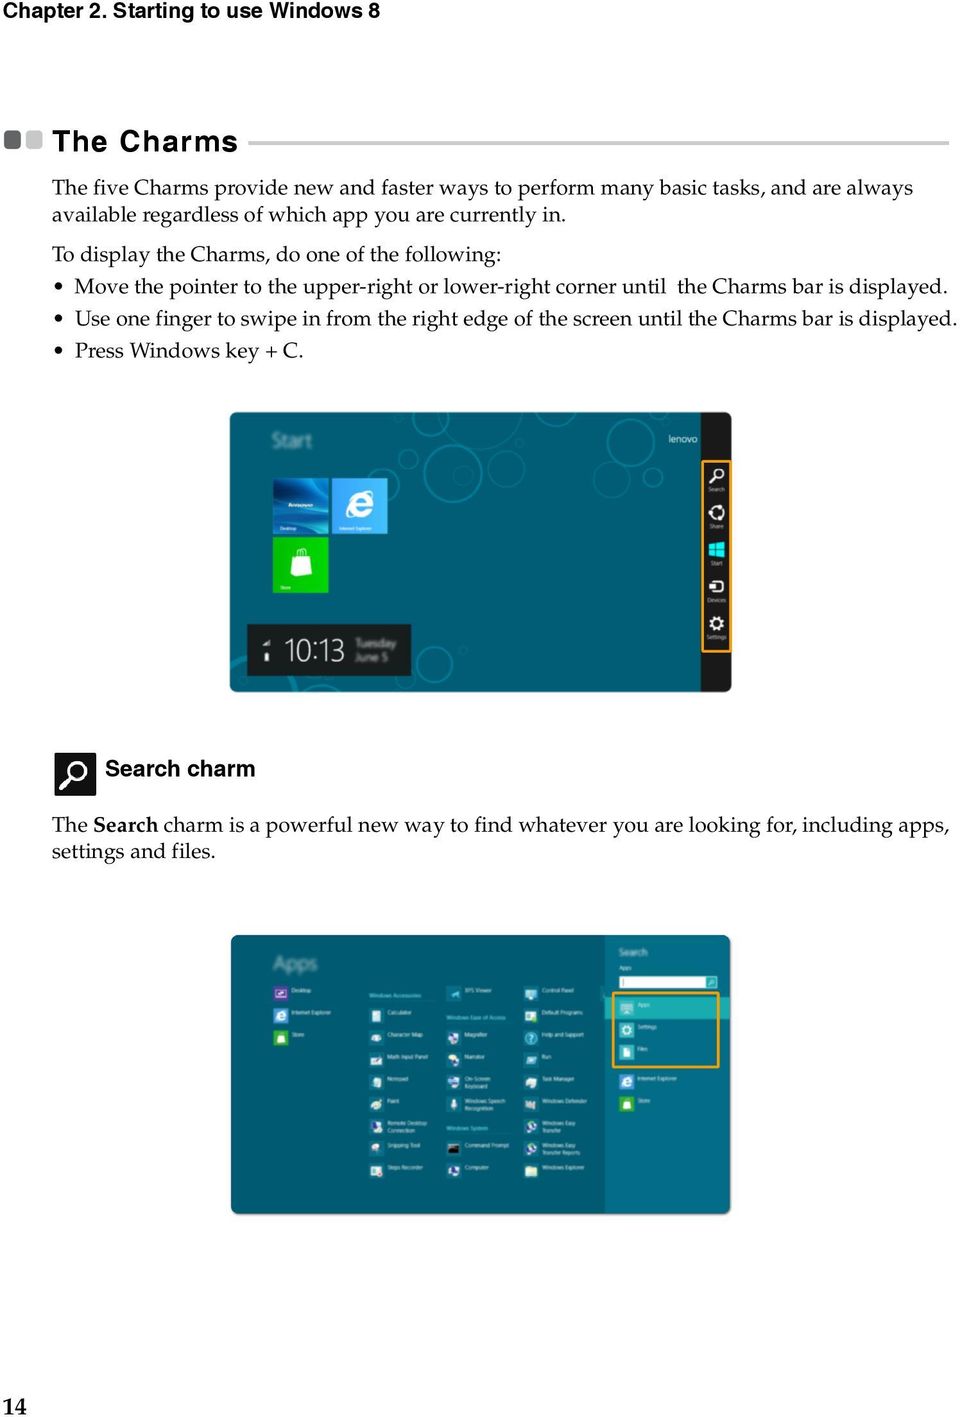 - - - - - - - - - - - - - - - - - - - - - - - - - - - - - - - - The five Charms provide new and faster ways to perform many basic tasks, and are always available regardless of which app you are